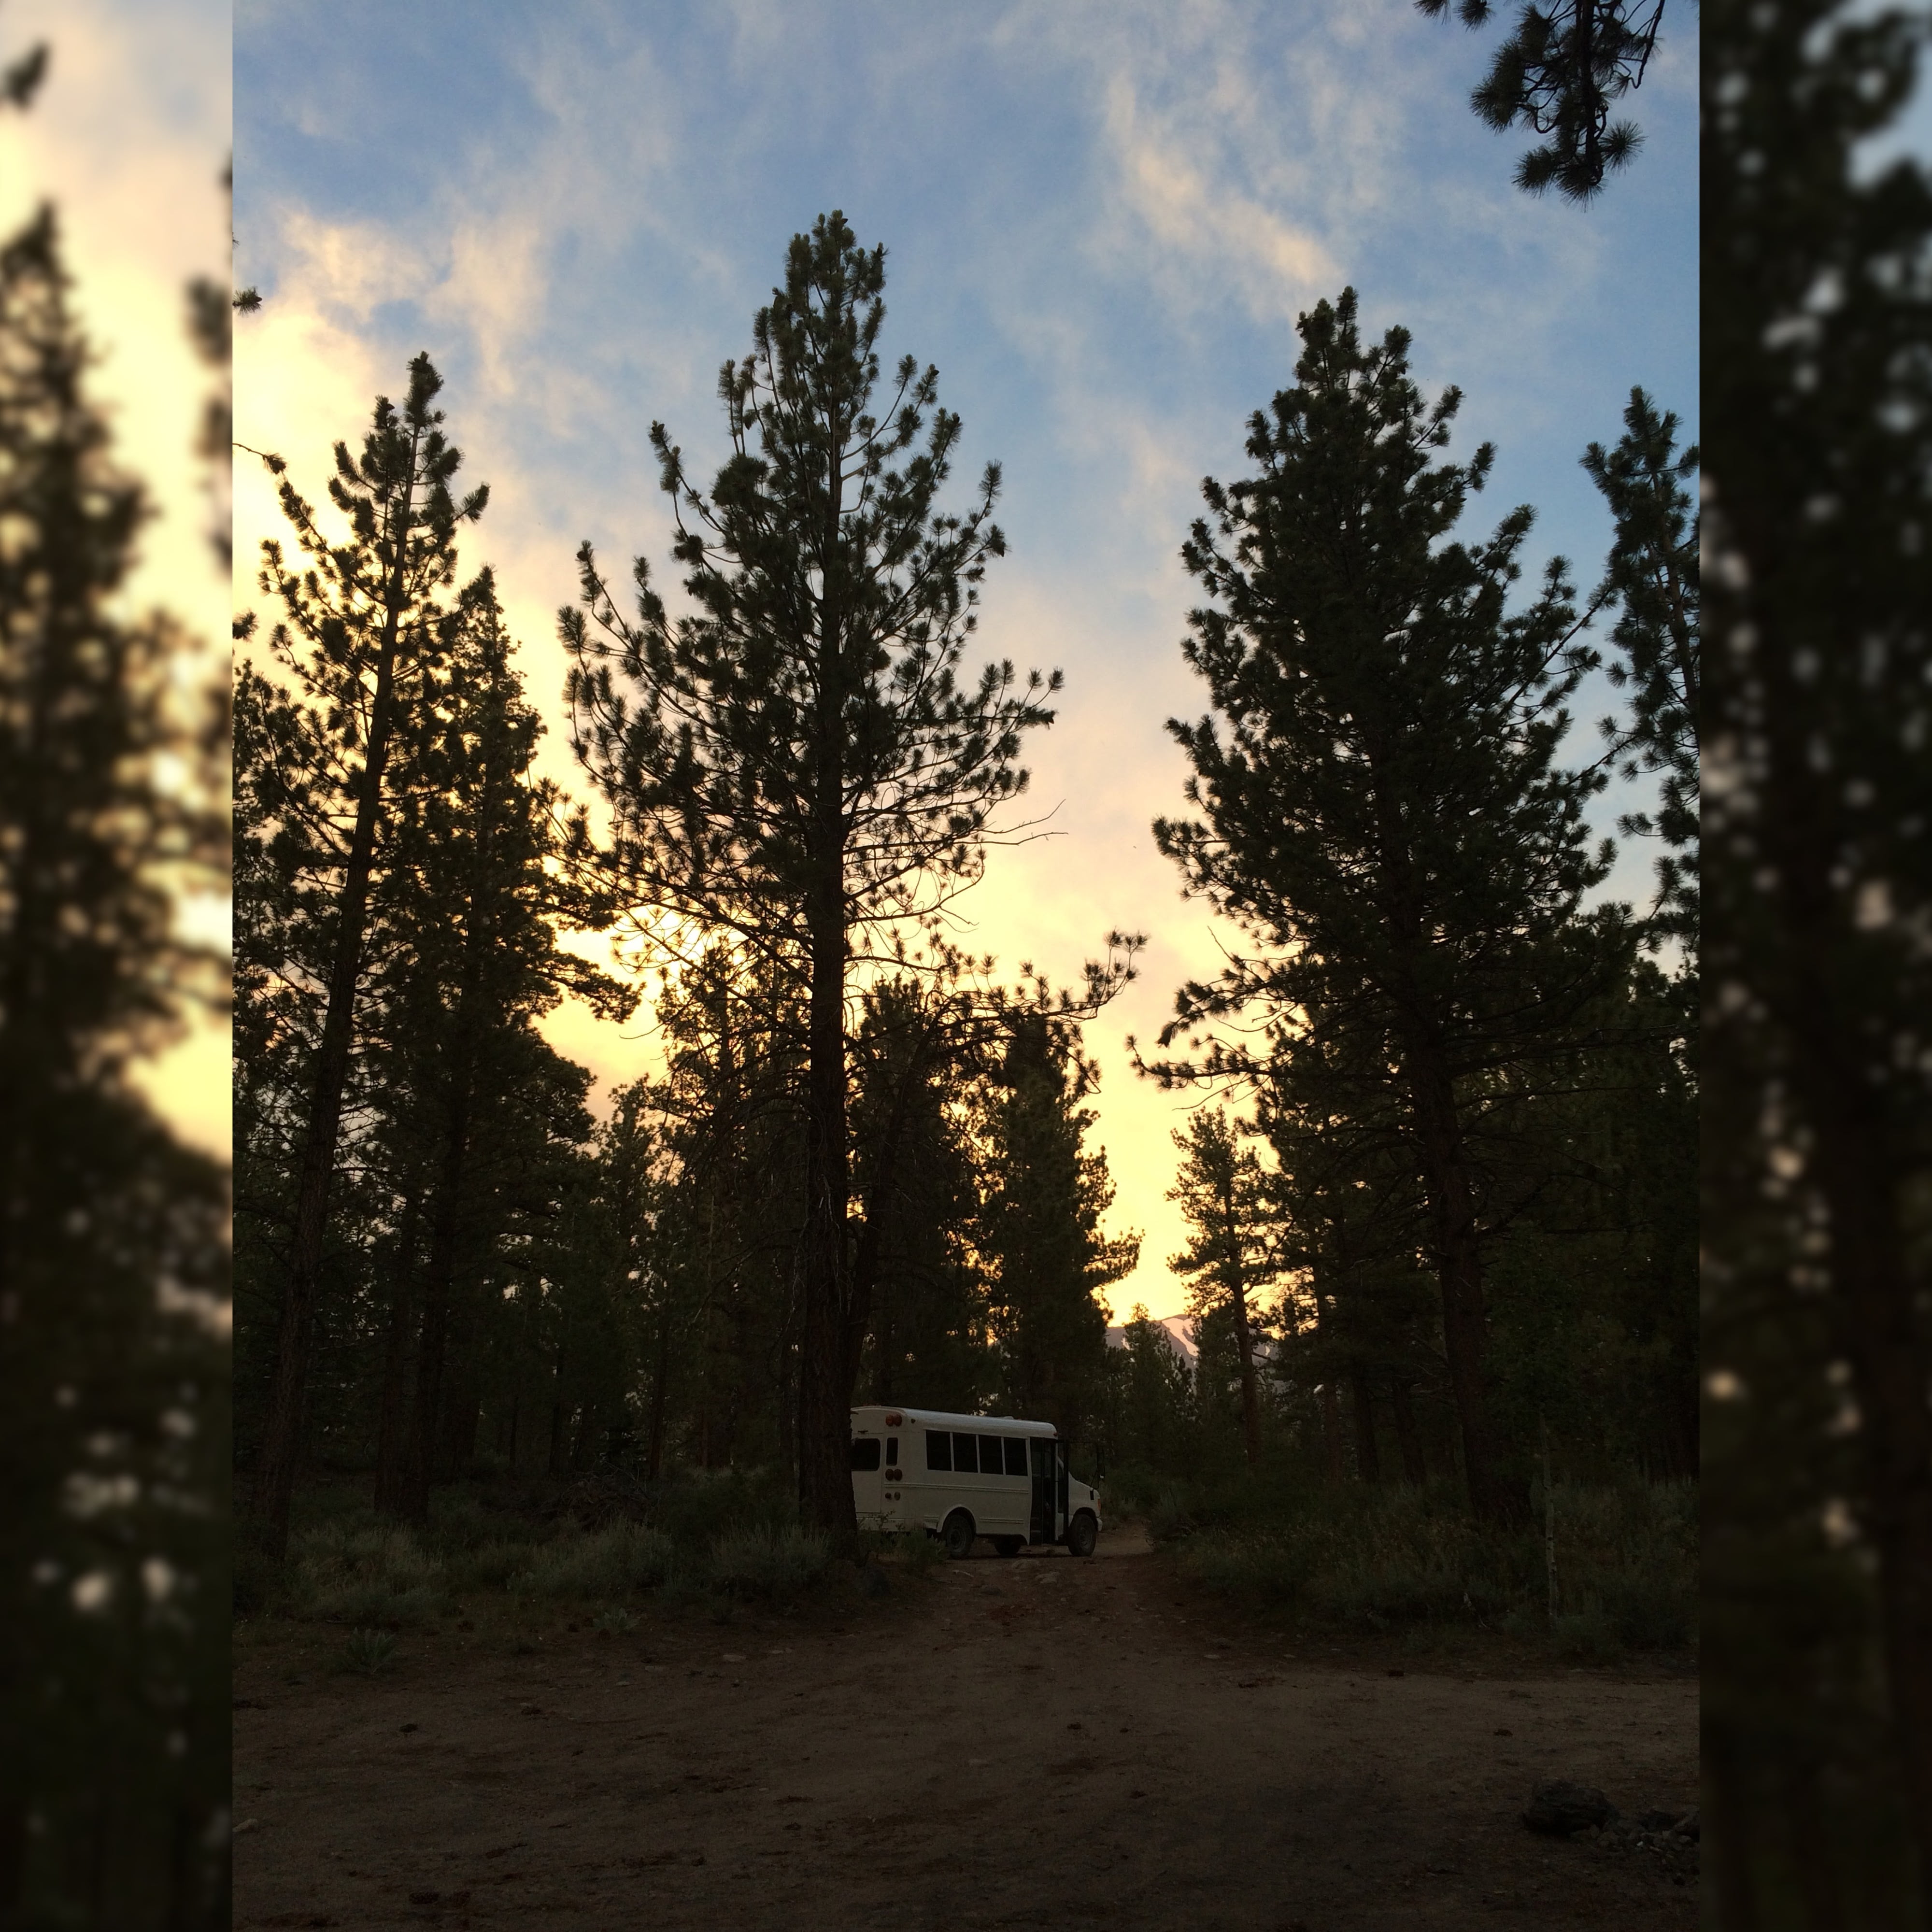 Bus in the forest at sunset